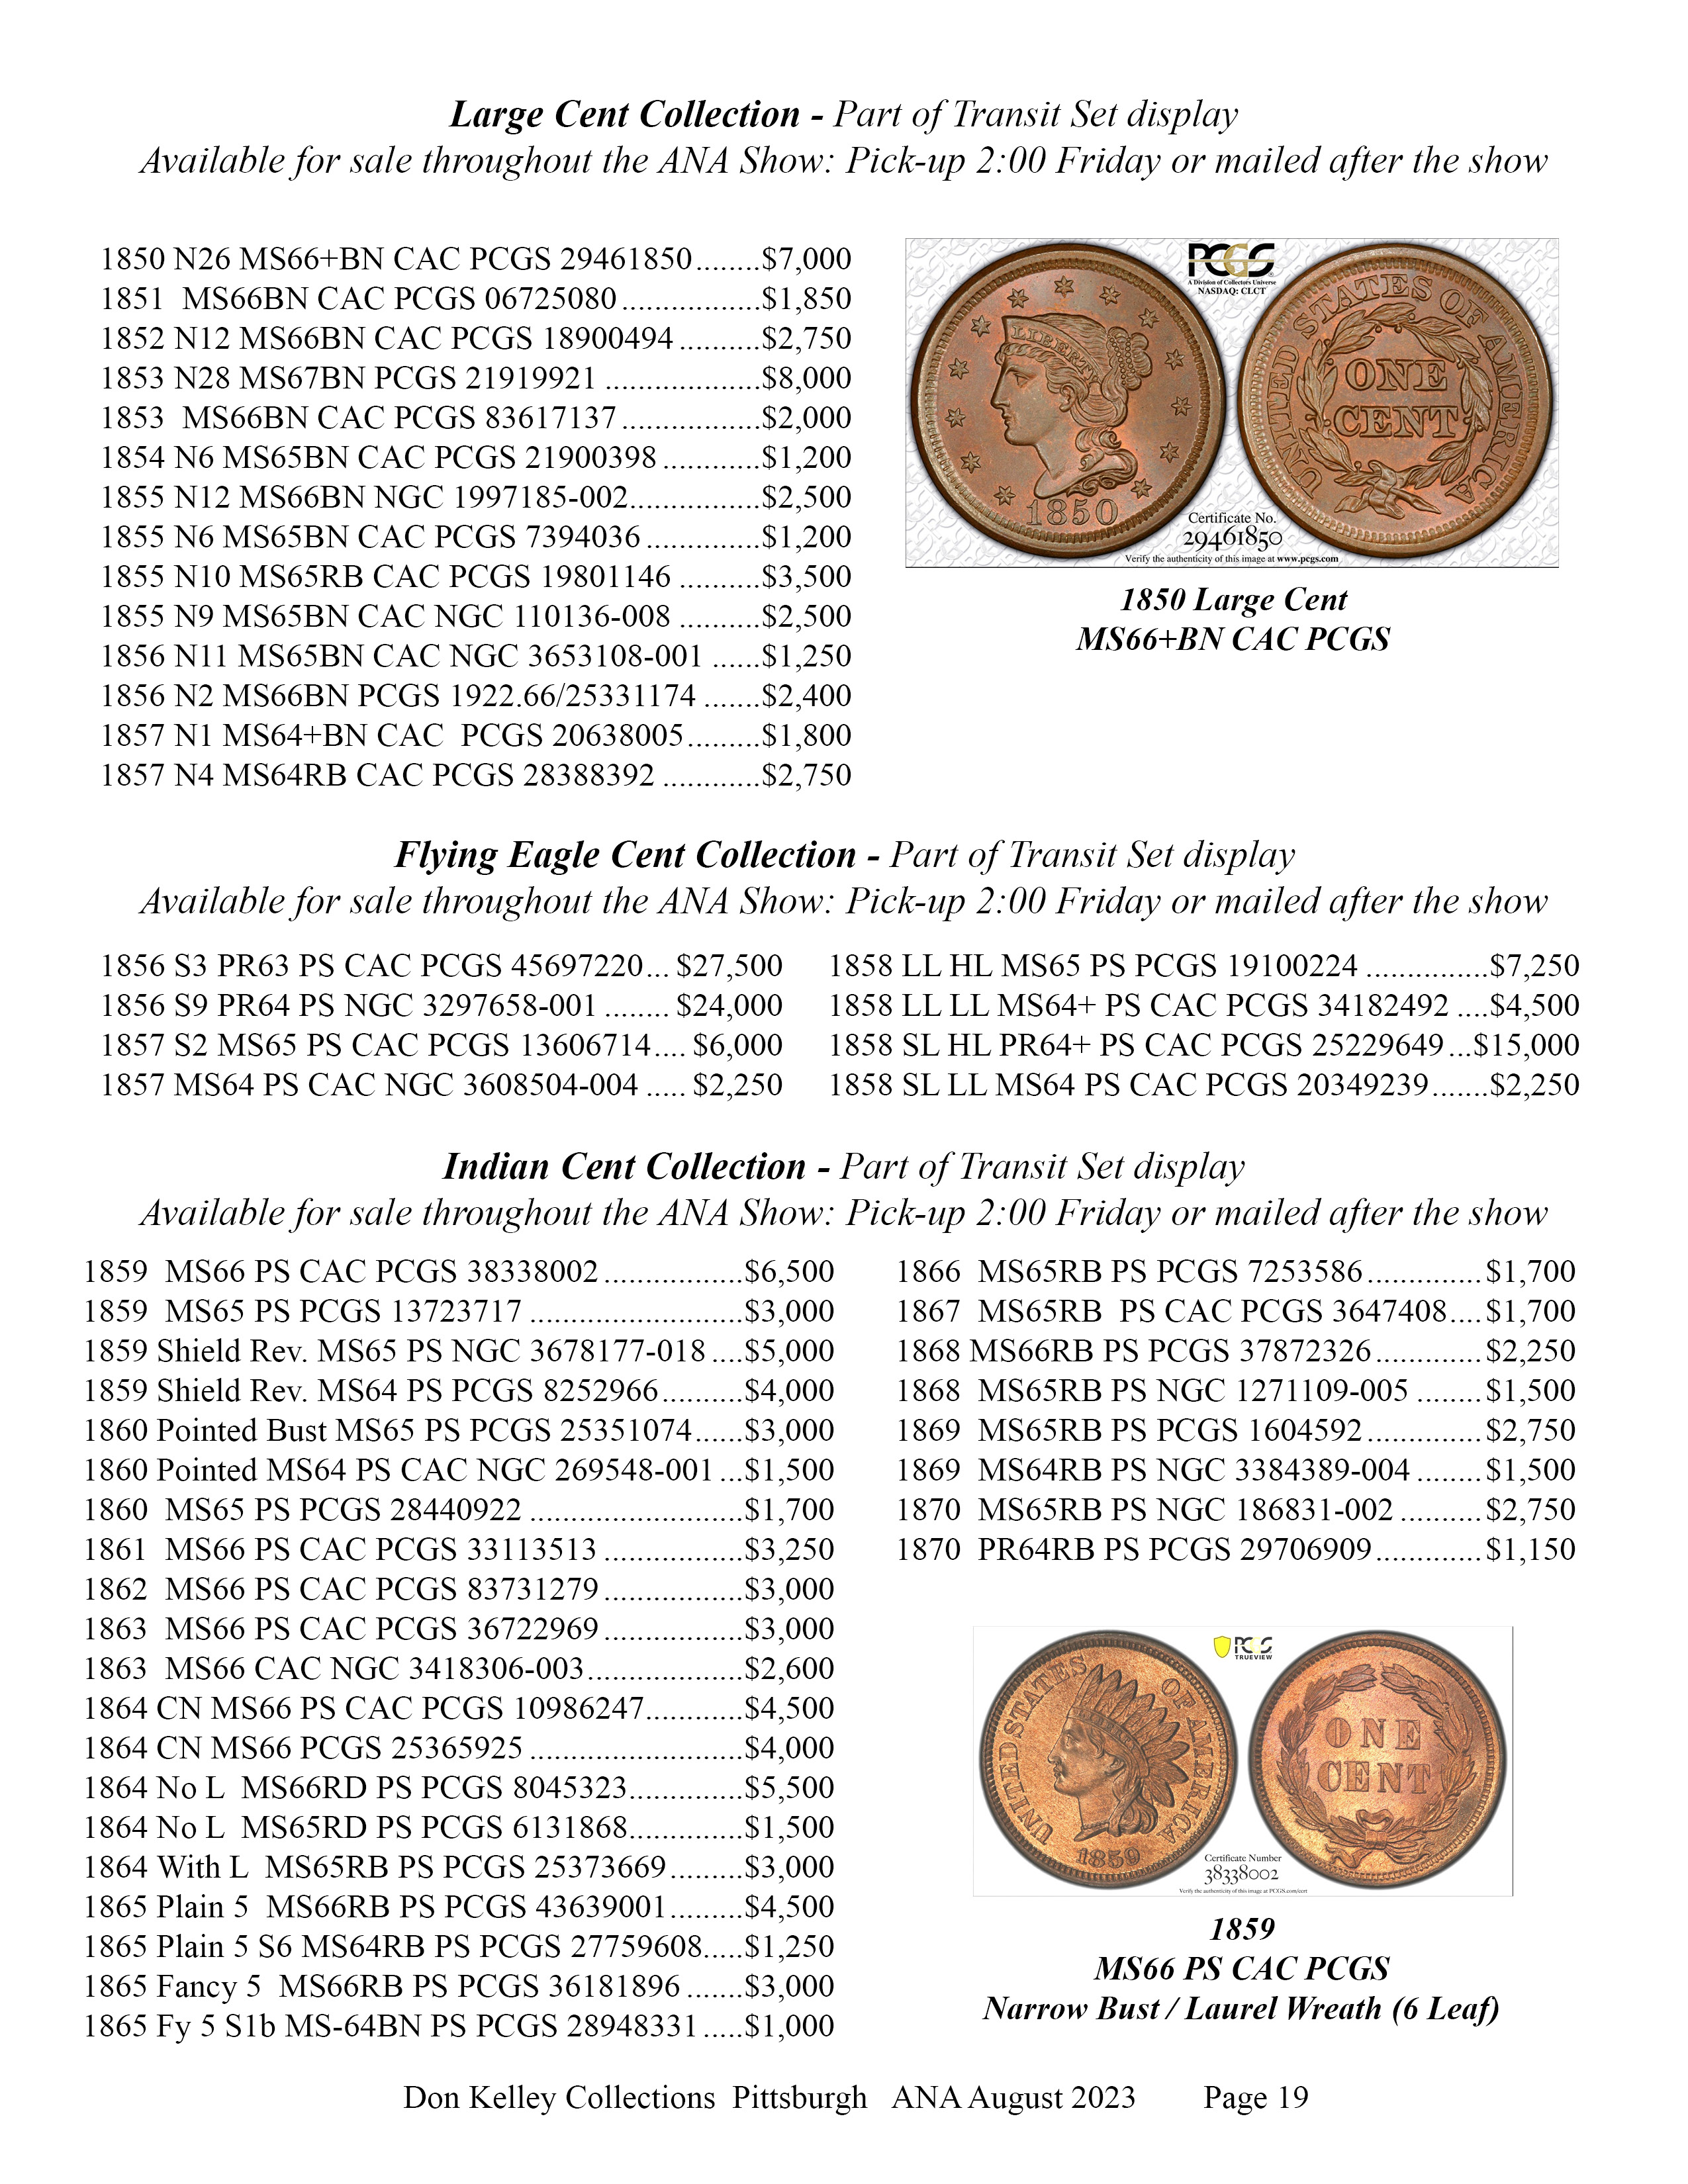 Don Kelley Indian cent collection